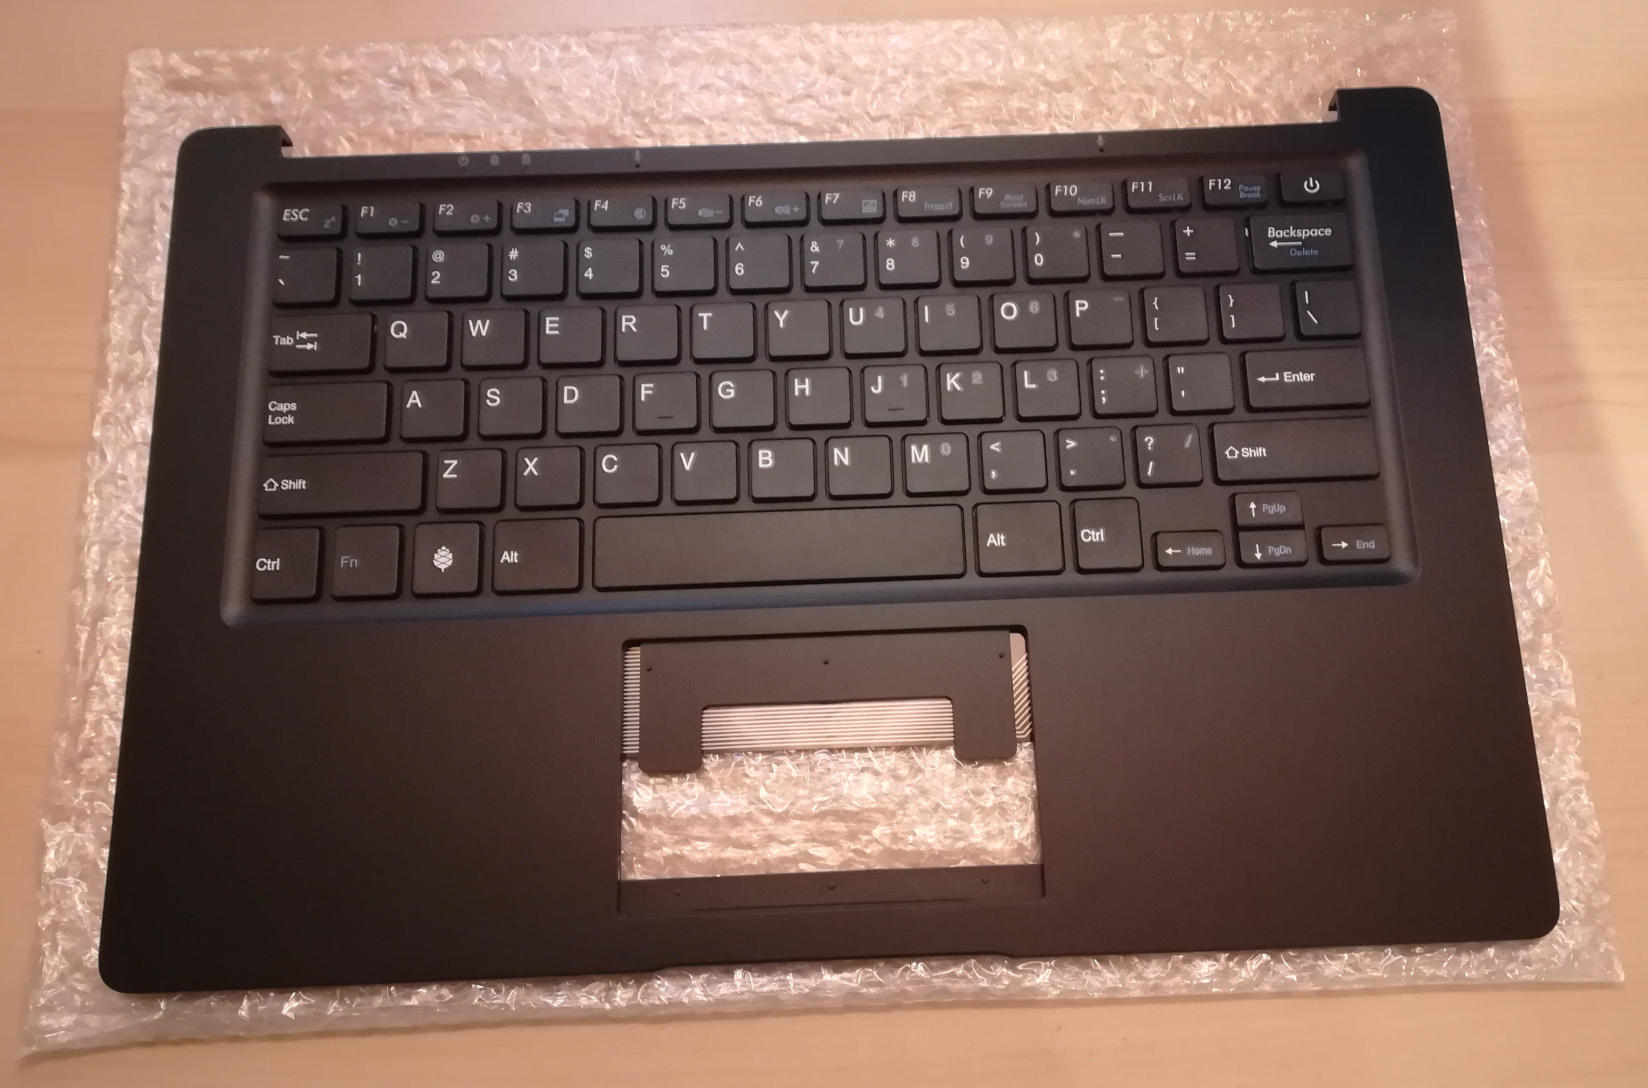 Replacement keyboard (front)